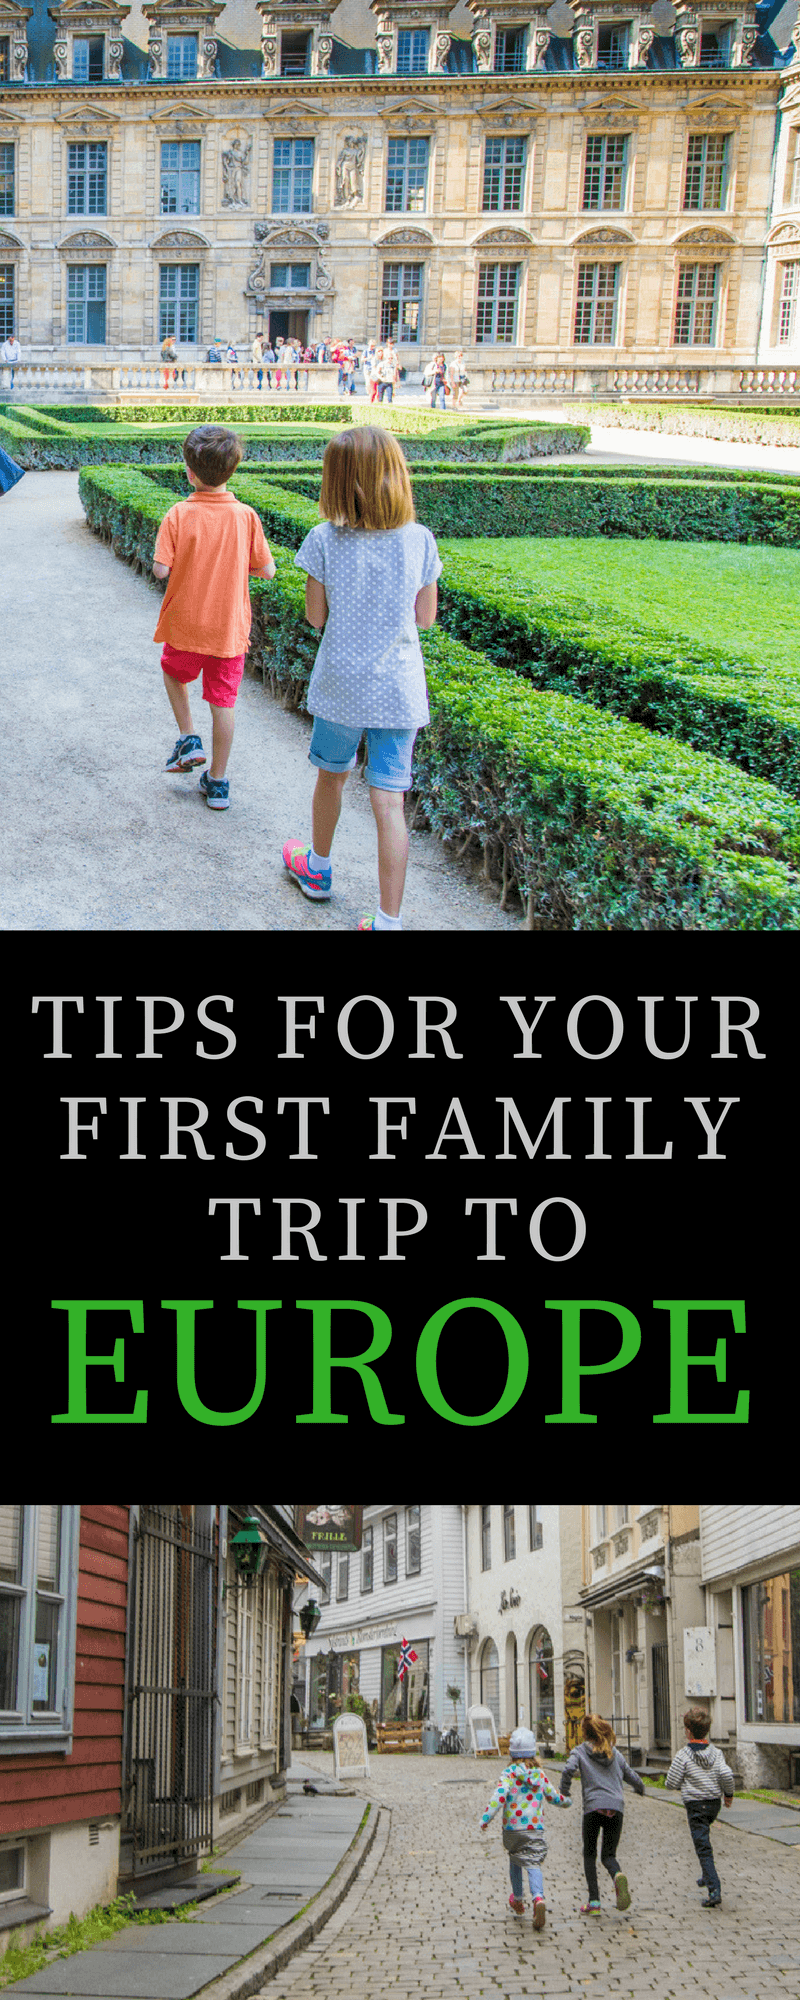 Taking your kids to Europe for the first time? Here';s my advice, based on 15+ European trips with my kids over 10 years.